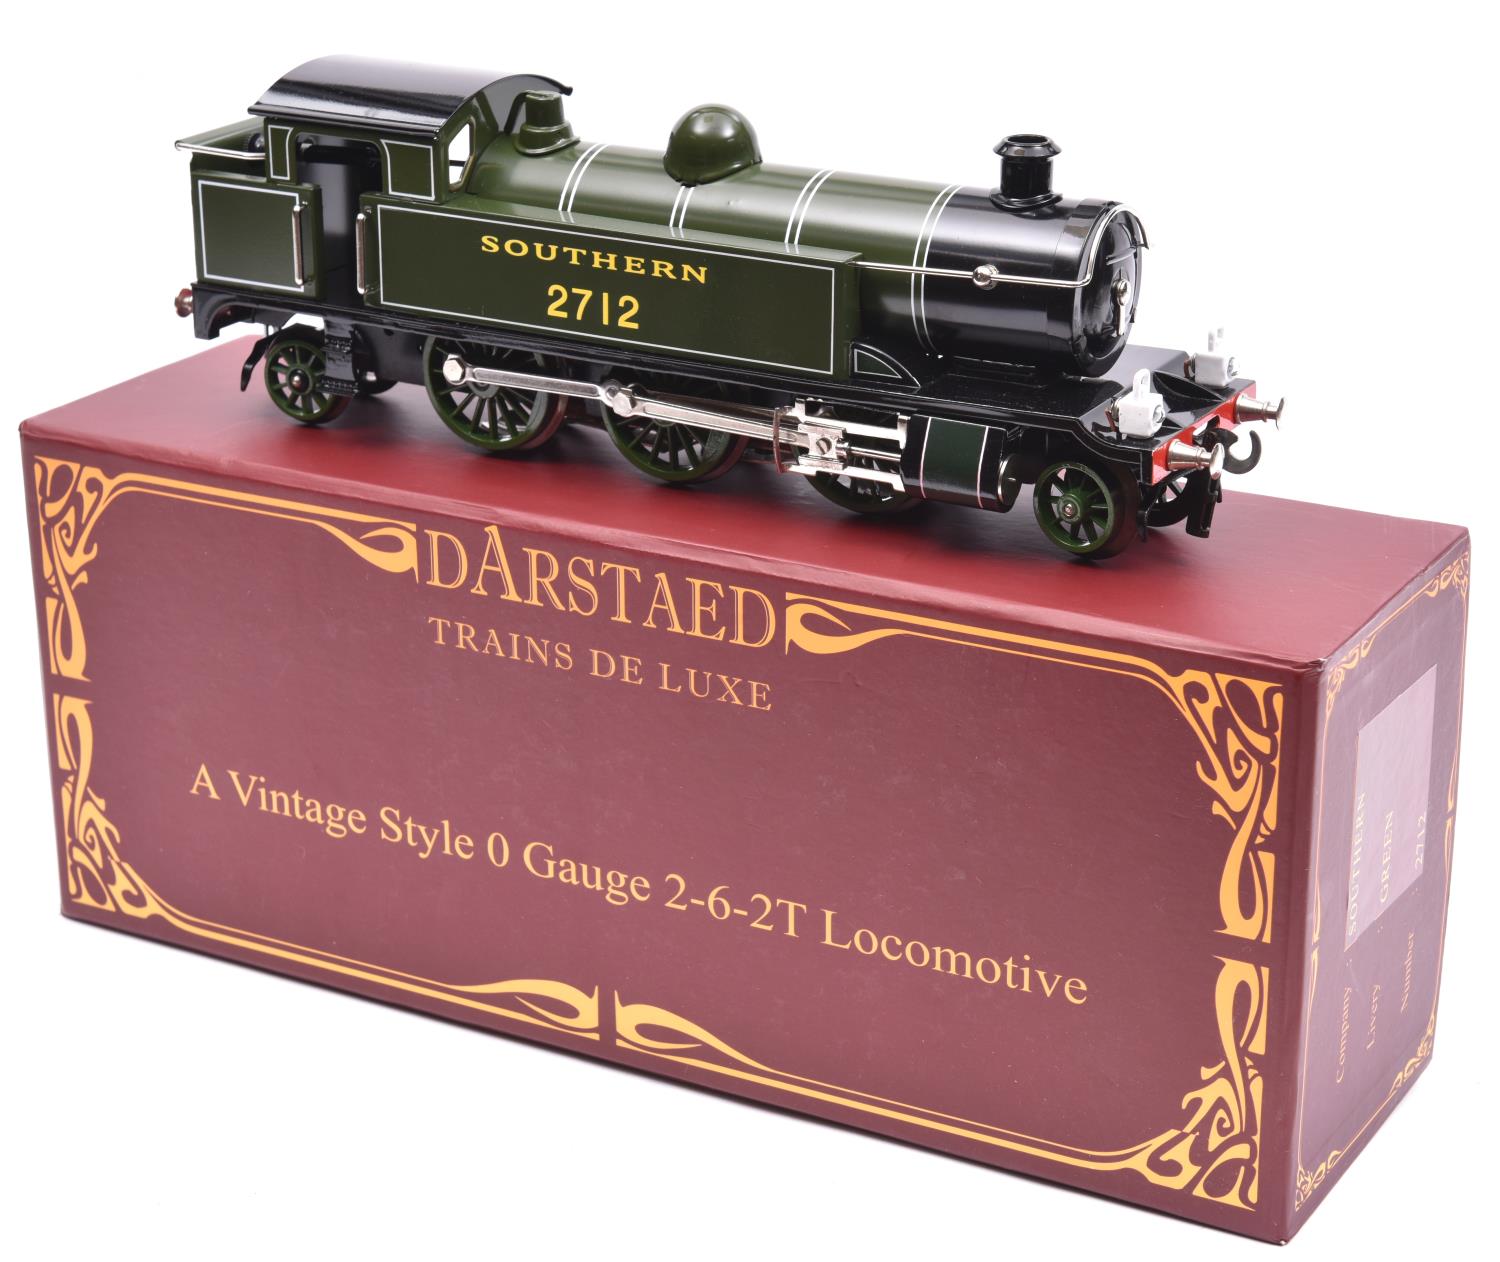 A Darstaed Trains O gauge Southern Railway 2-6-2T locomotive, 2712, in lined green livery. For 3